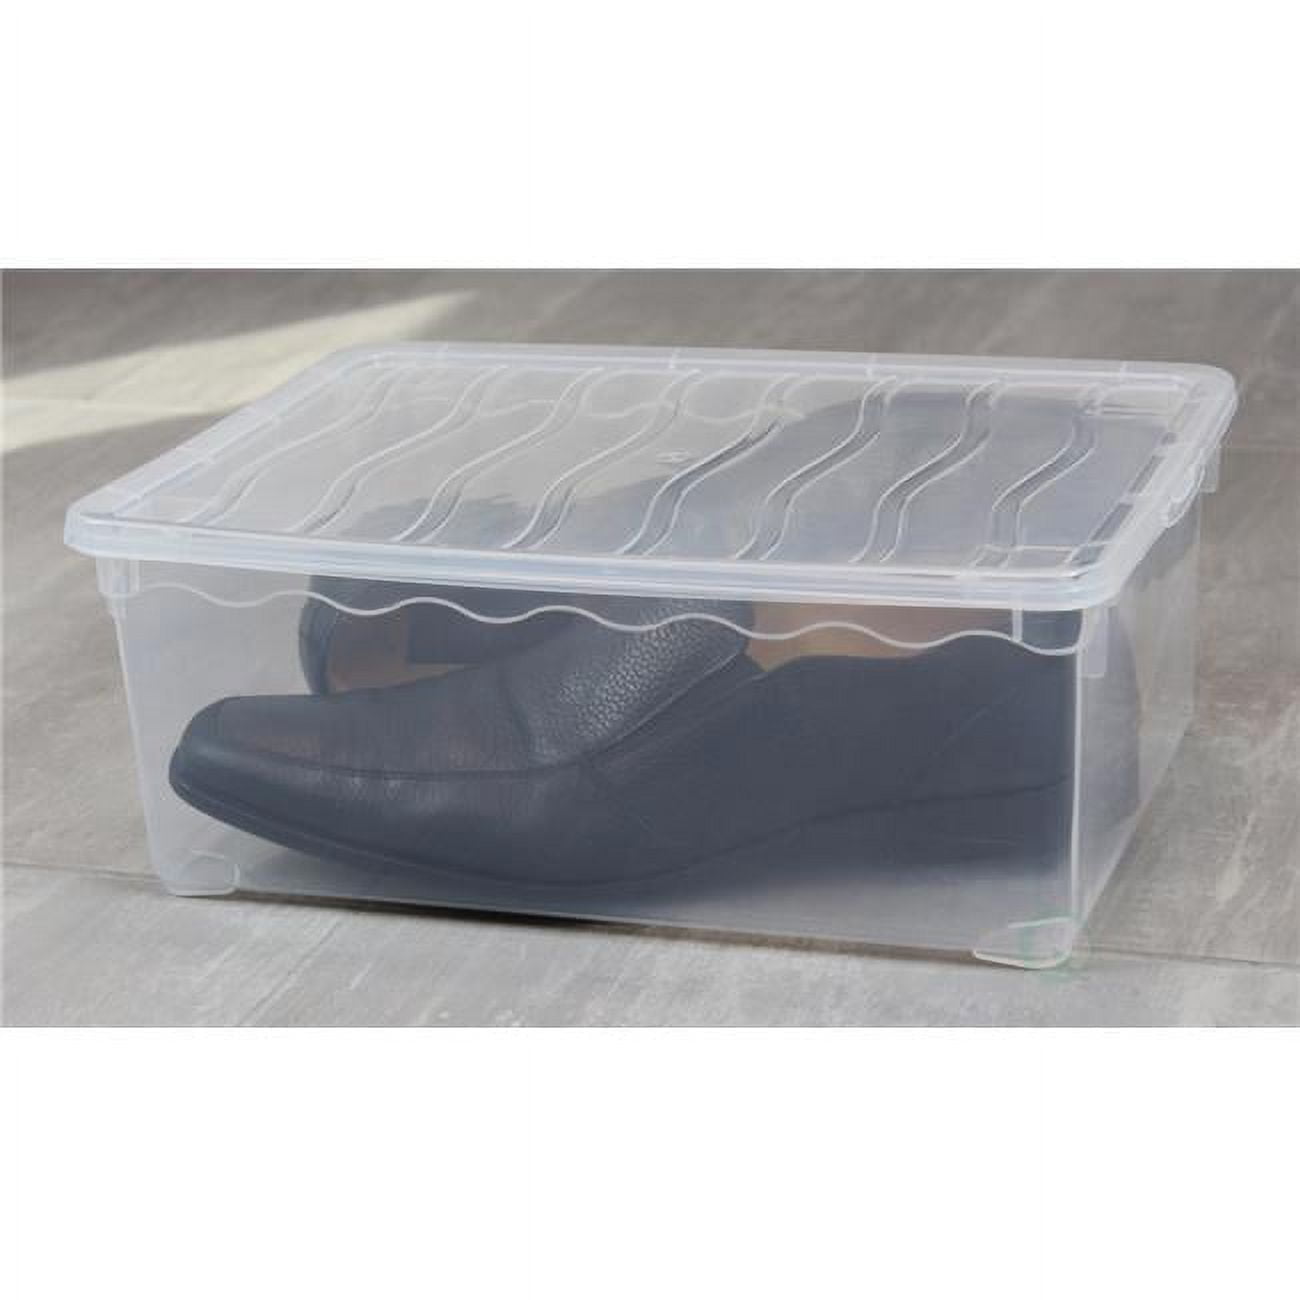 Mainstays Clear Plastic Glossy Finish Extra Wide Shoe Box with Lid , Adult Size